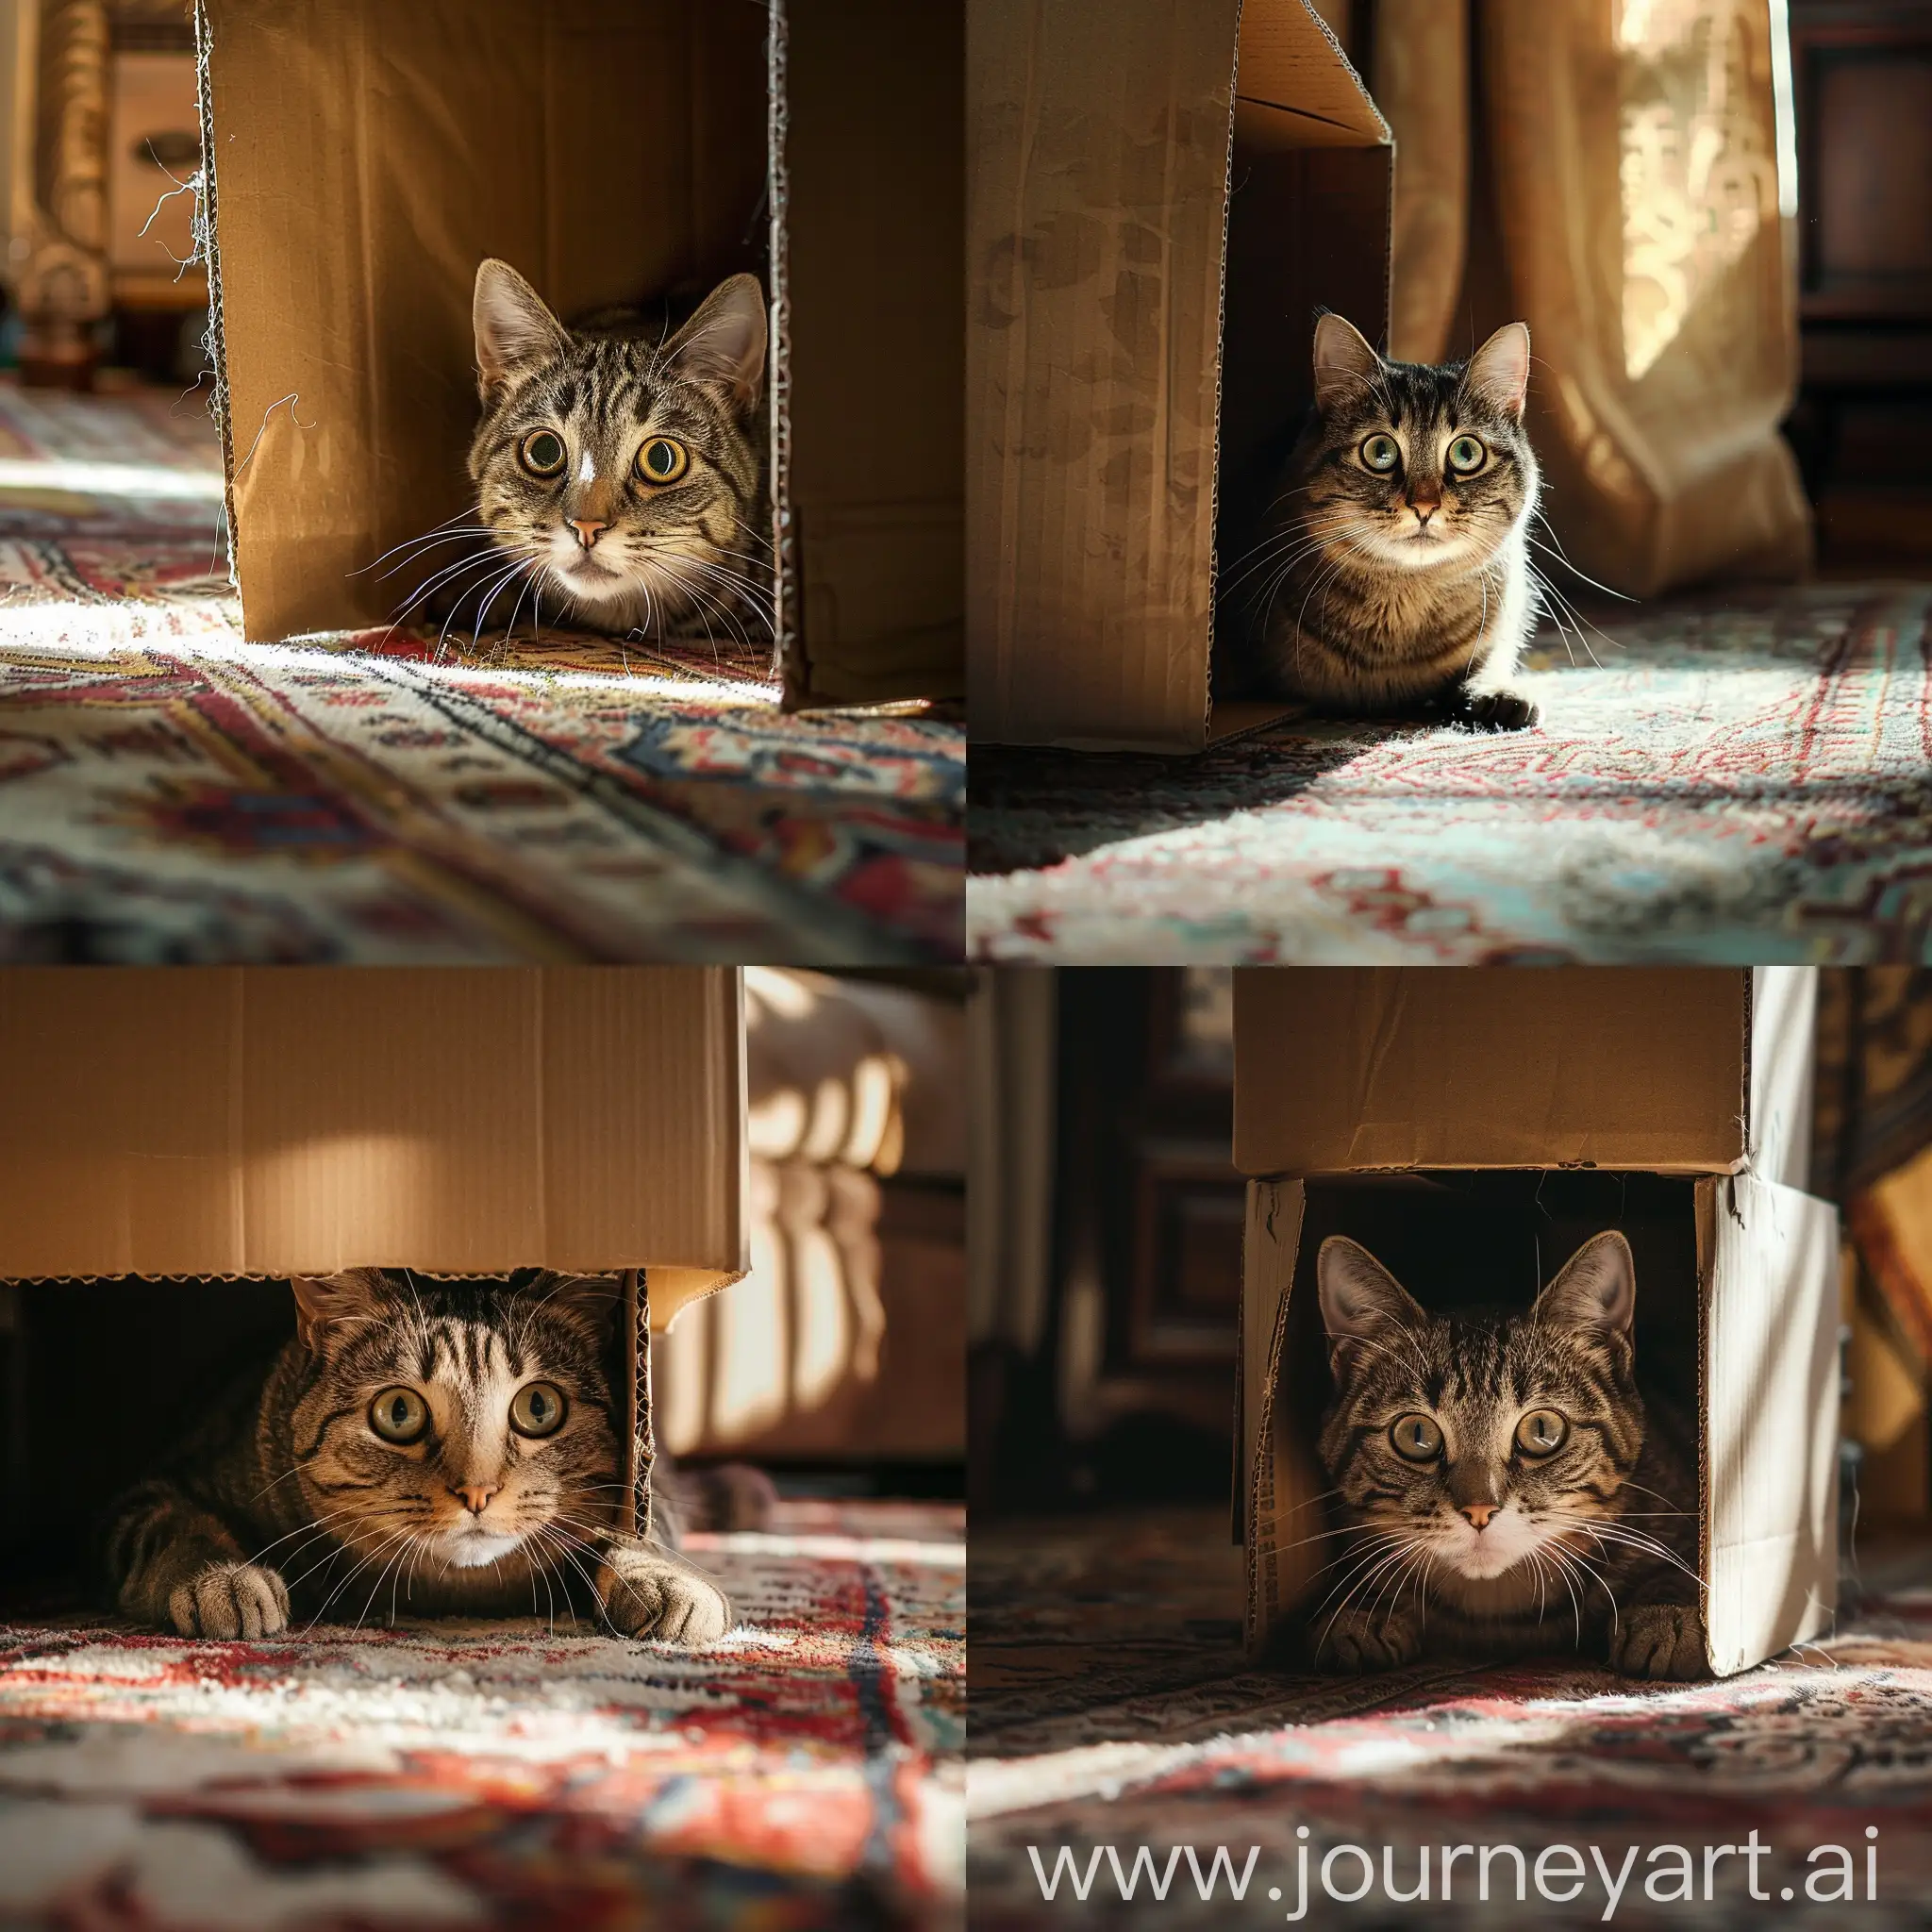 A curious cat hiding under a cardboard box, peeking out with wide, surprised eyes directly at the camera. The cat is sitting on a luxurious silk rug, with intricate patterns and rich colors. Sunlight streams in through a nearby window, casting warm, soft light on the cat and the rug, highlighting the textures and details. The room is cozy, with a hint of vintage decor visible in the background.